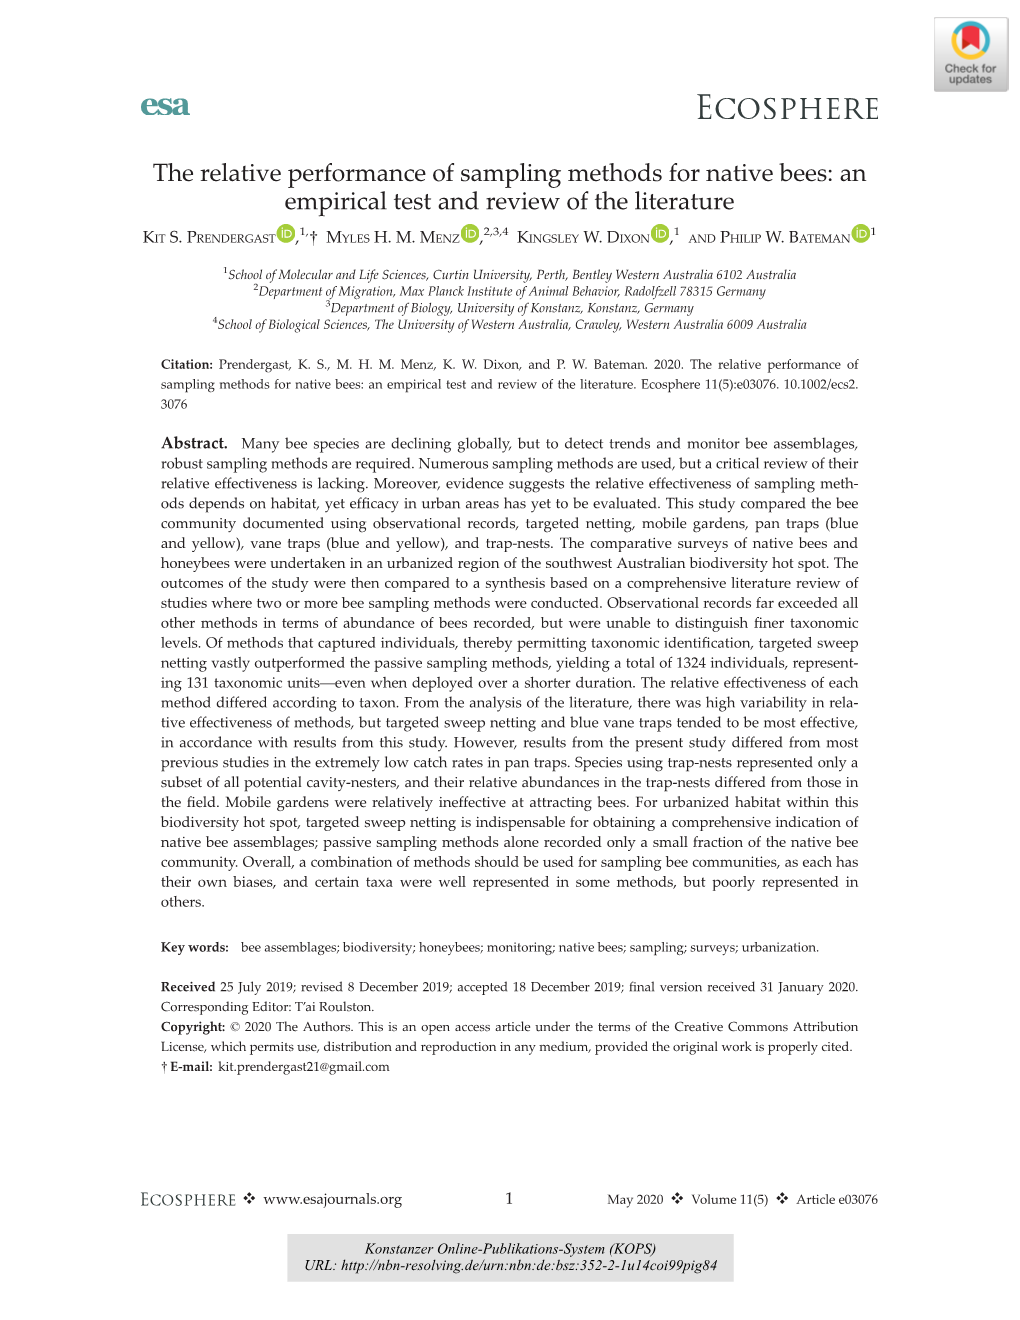 The Relative Performance of Sampling Methods for Native Bees : an Empirical Test and Review of the Literature